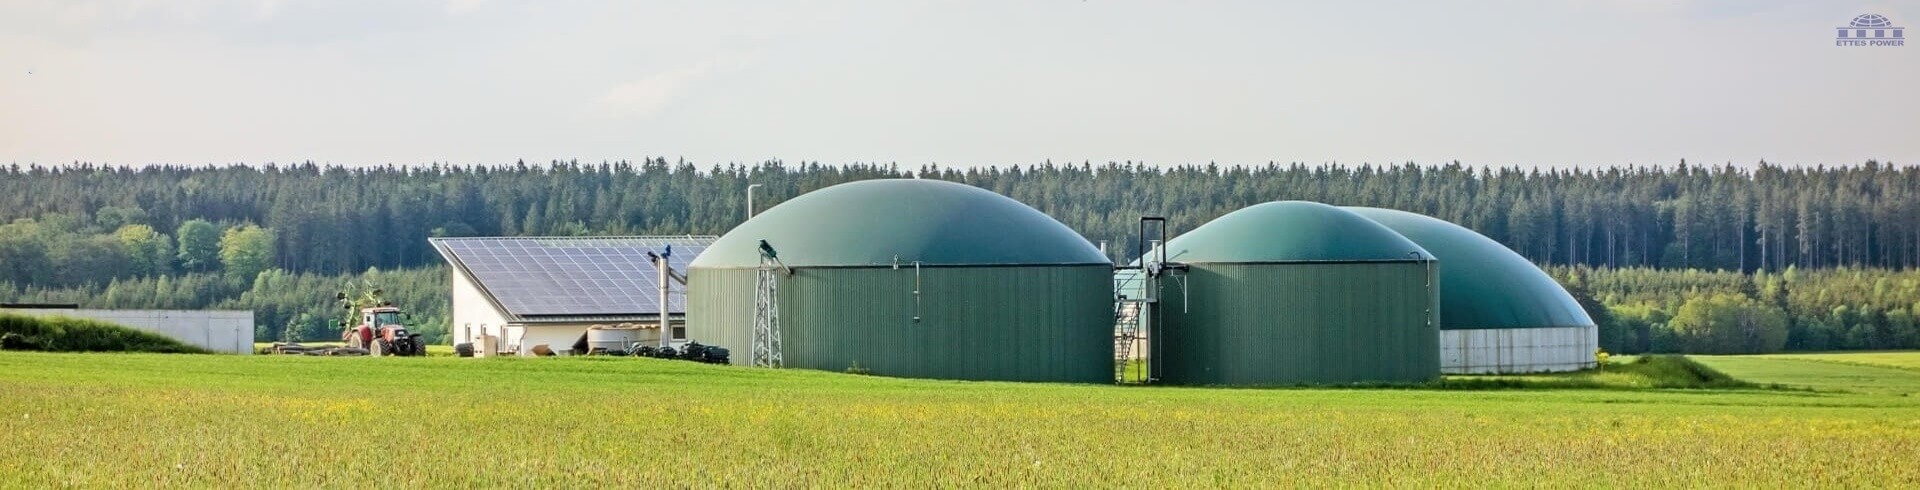 Farm digester for methane biogas genset & combined heat and power CHP ETTES POWER